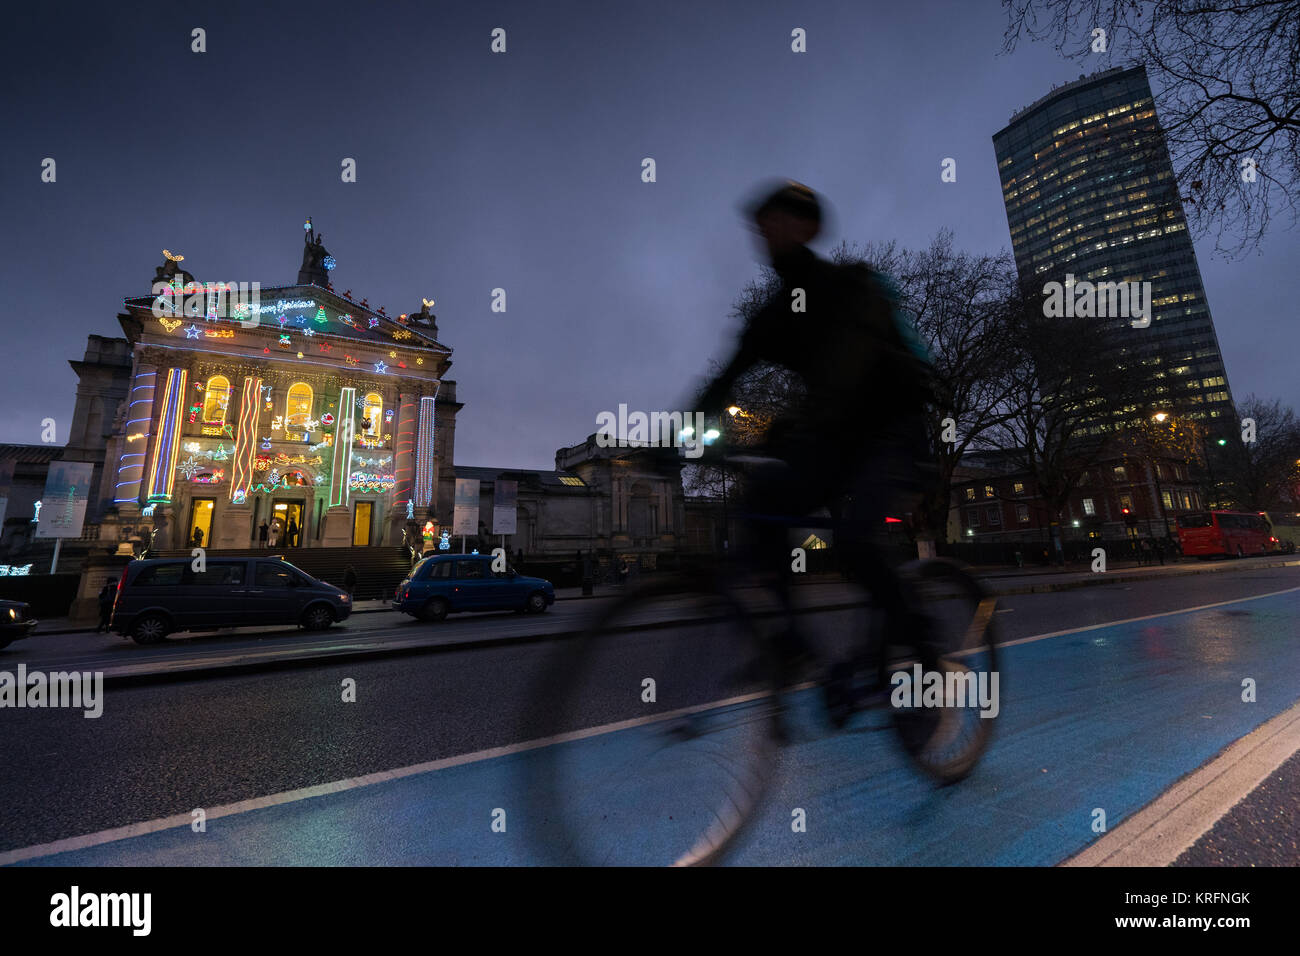 London, UK. 20th Dec, 2017. The Tate Britain building decorated with Christmas lights with a passing cyclist in the foreground. Photo date: Wednesday, December 20, 2017. Credit: Roger Garfield/Alamy Live News Stock Photo